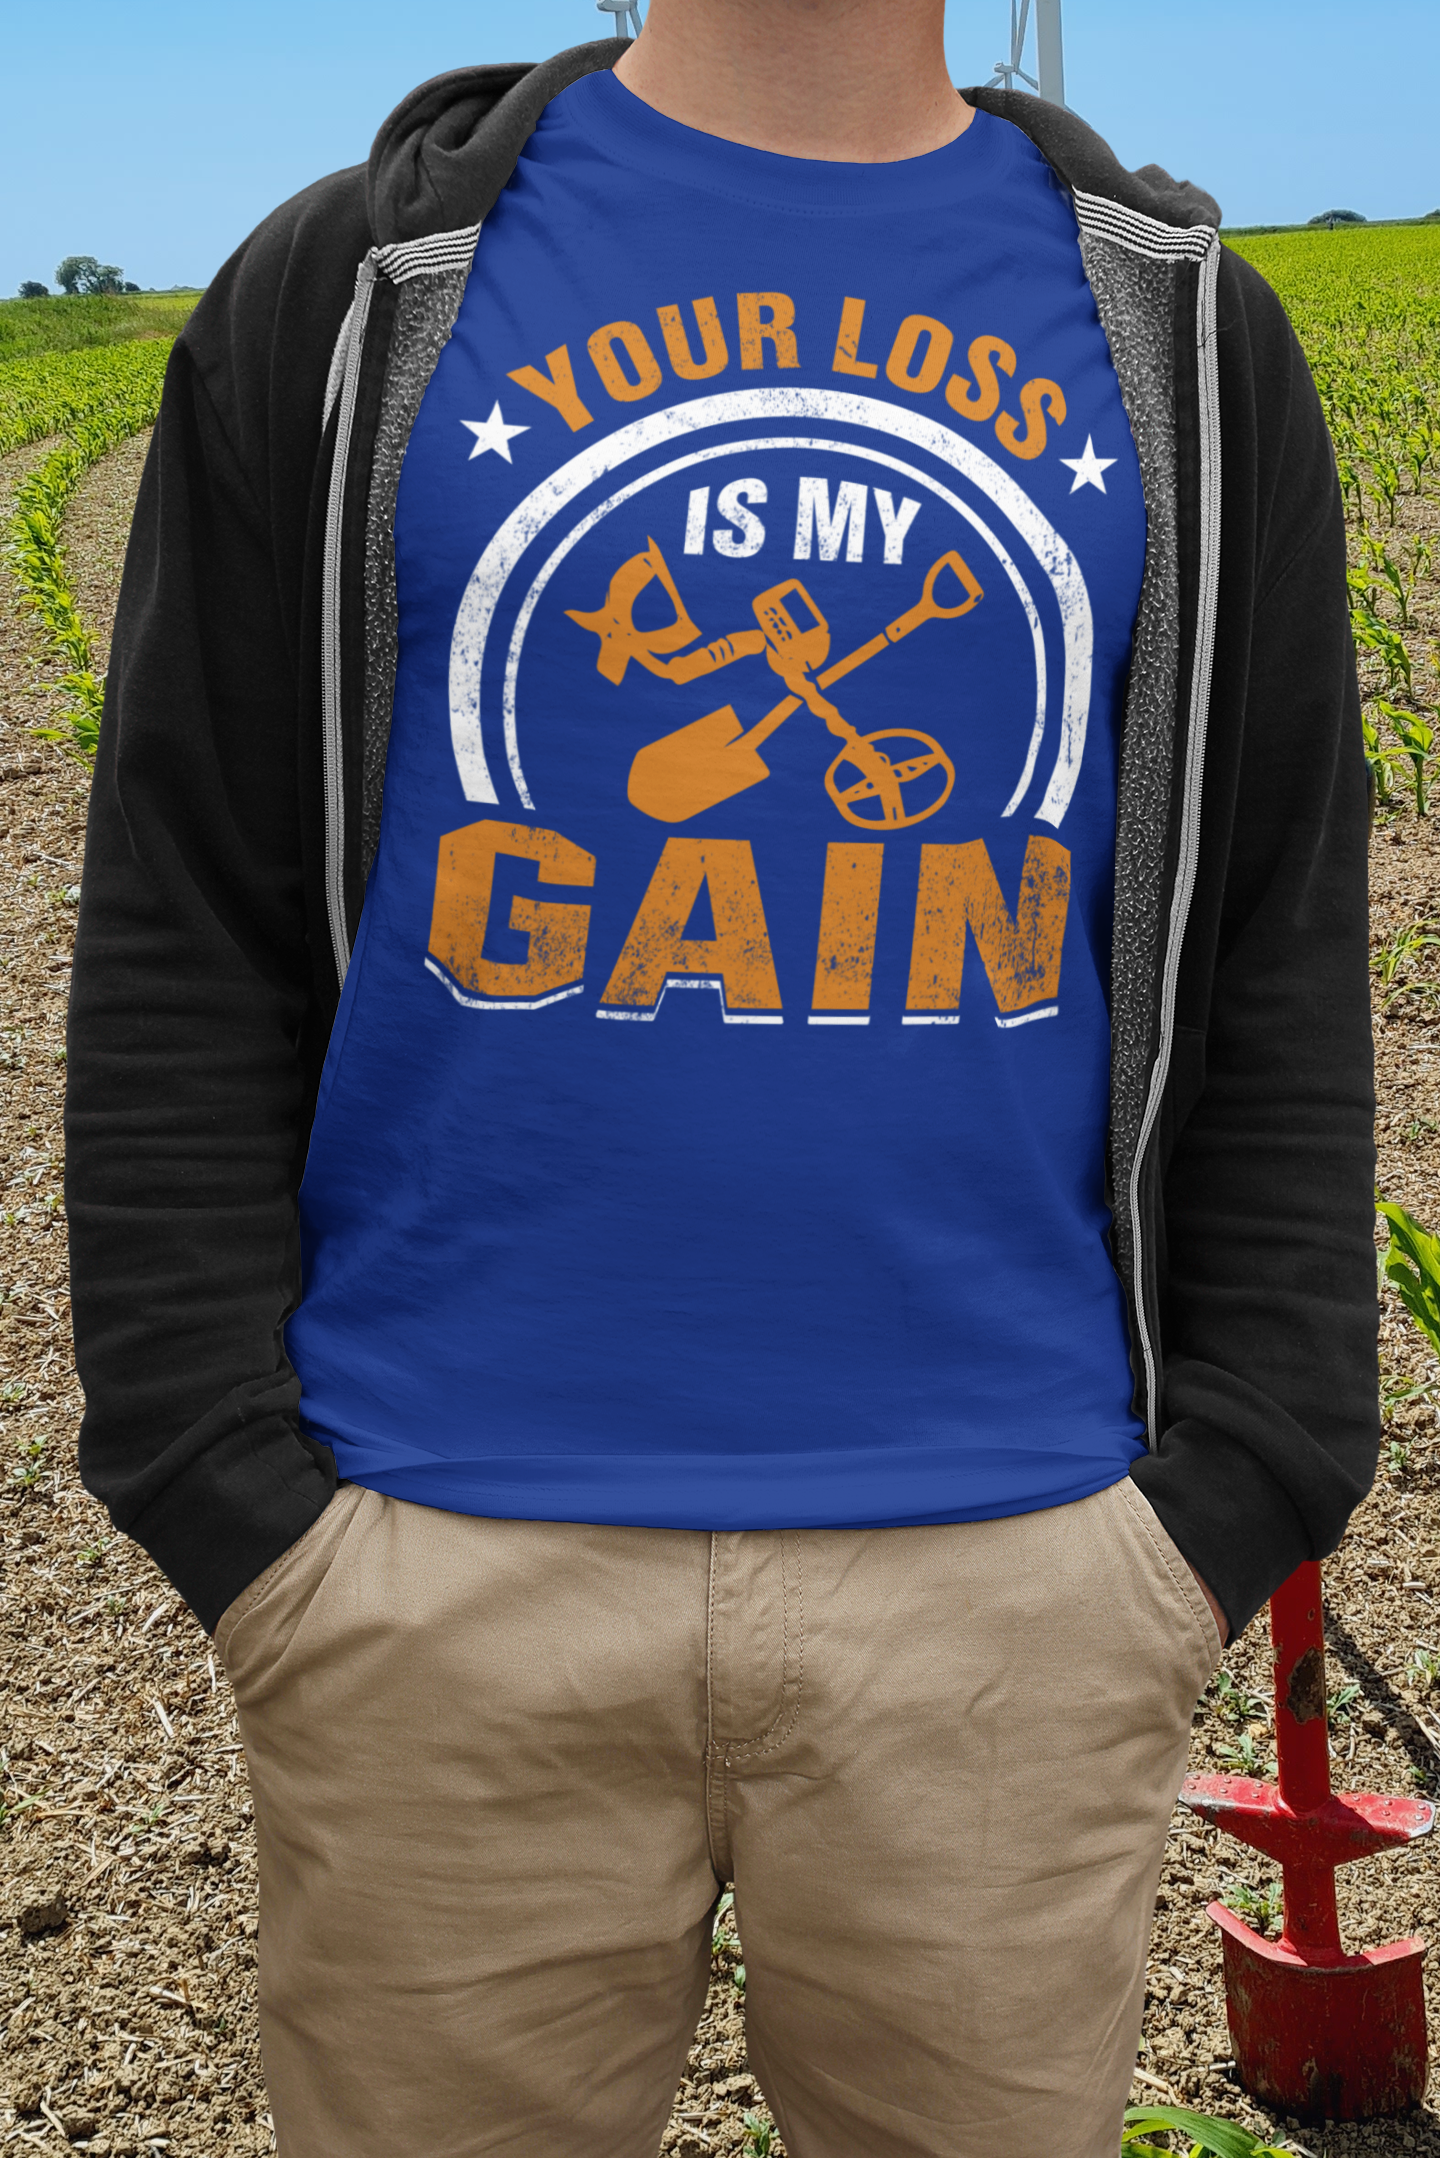 Your loss is my gain T-shirt